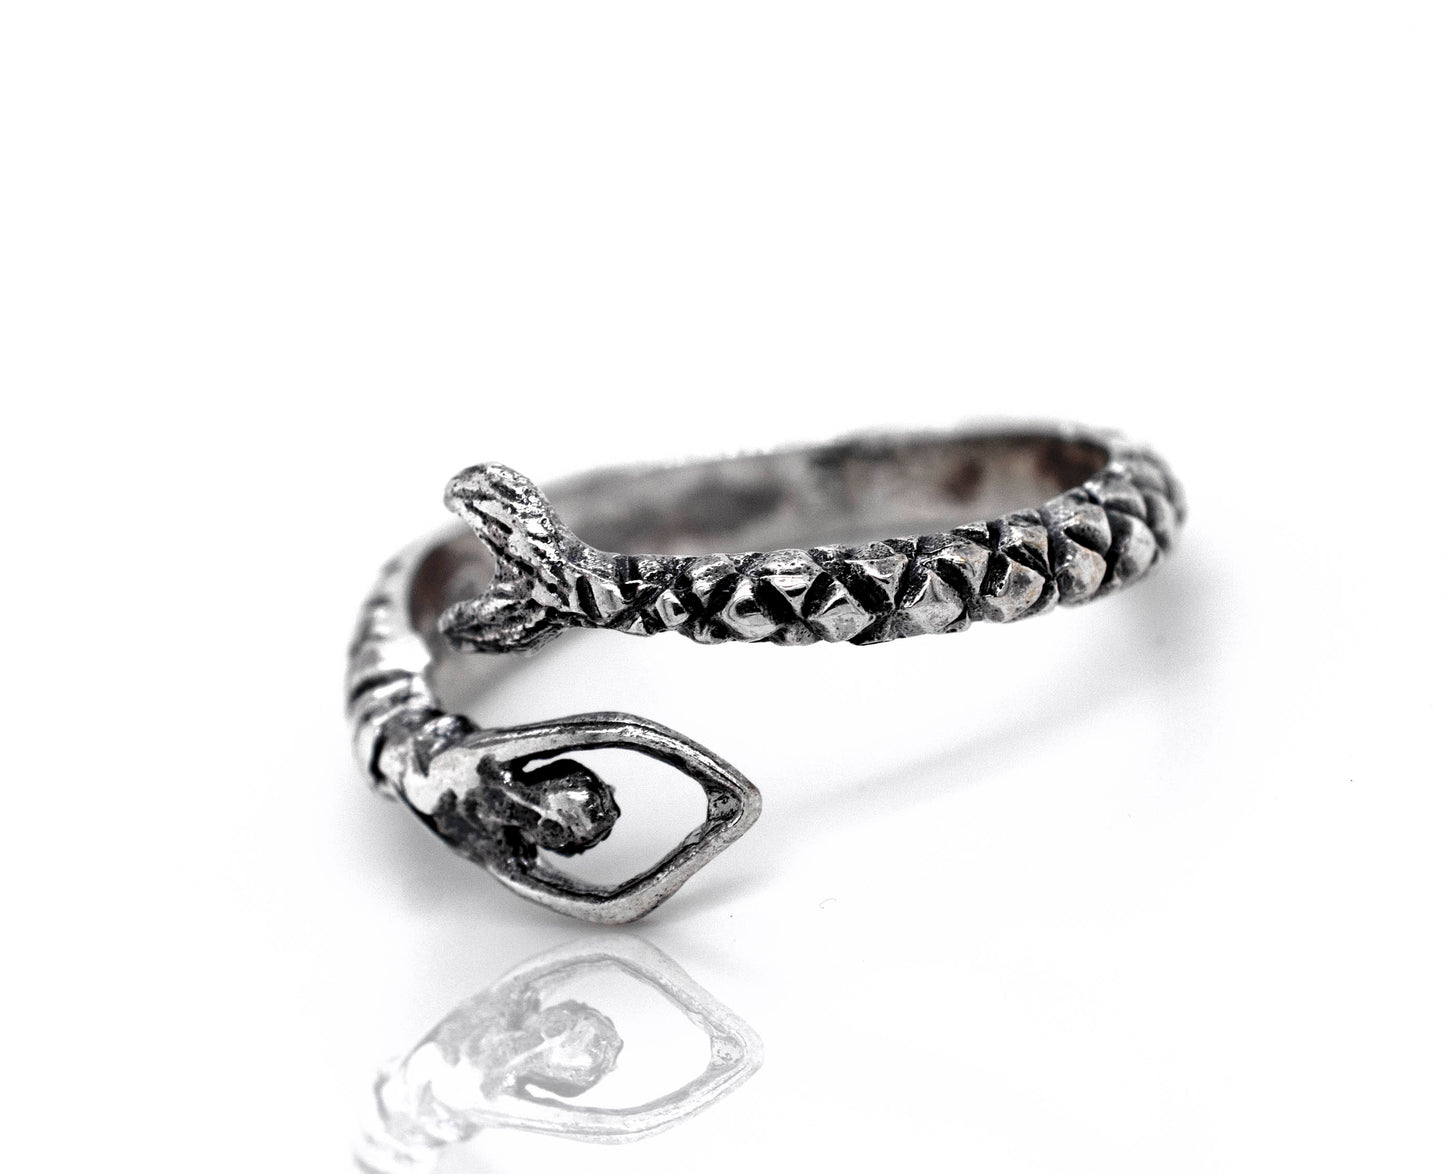 A Trendy Adjustable Mermaid Ring with a snake and stone on it.